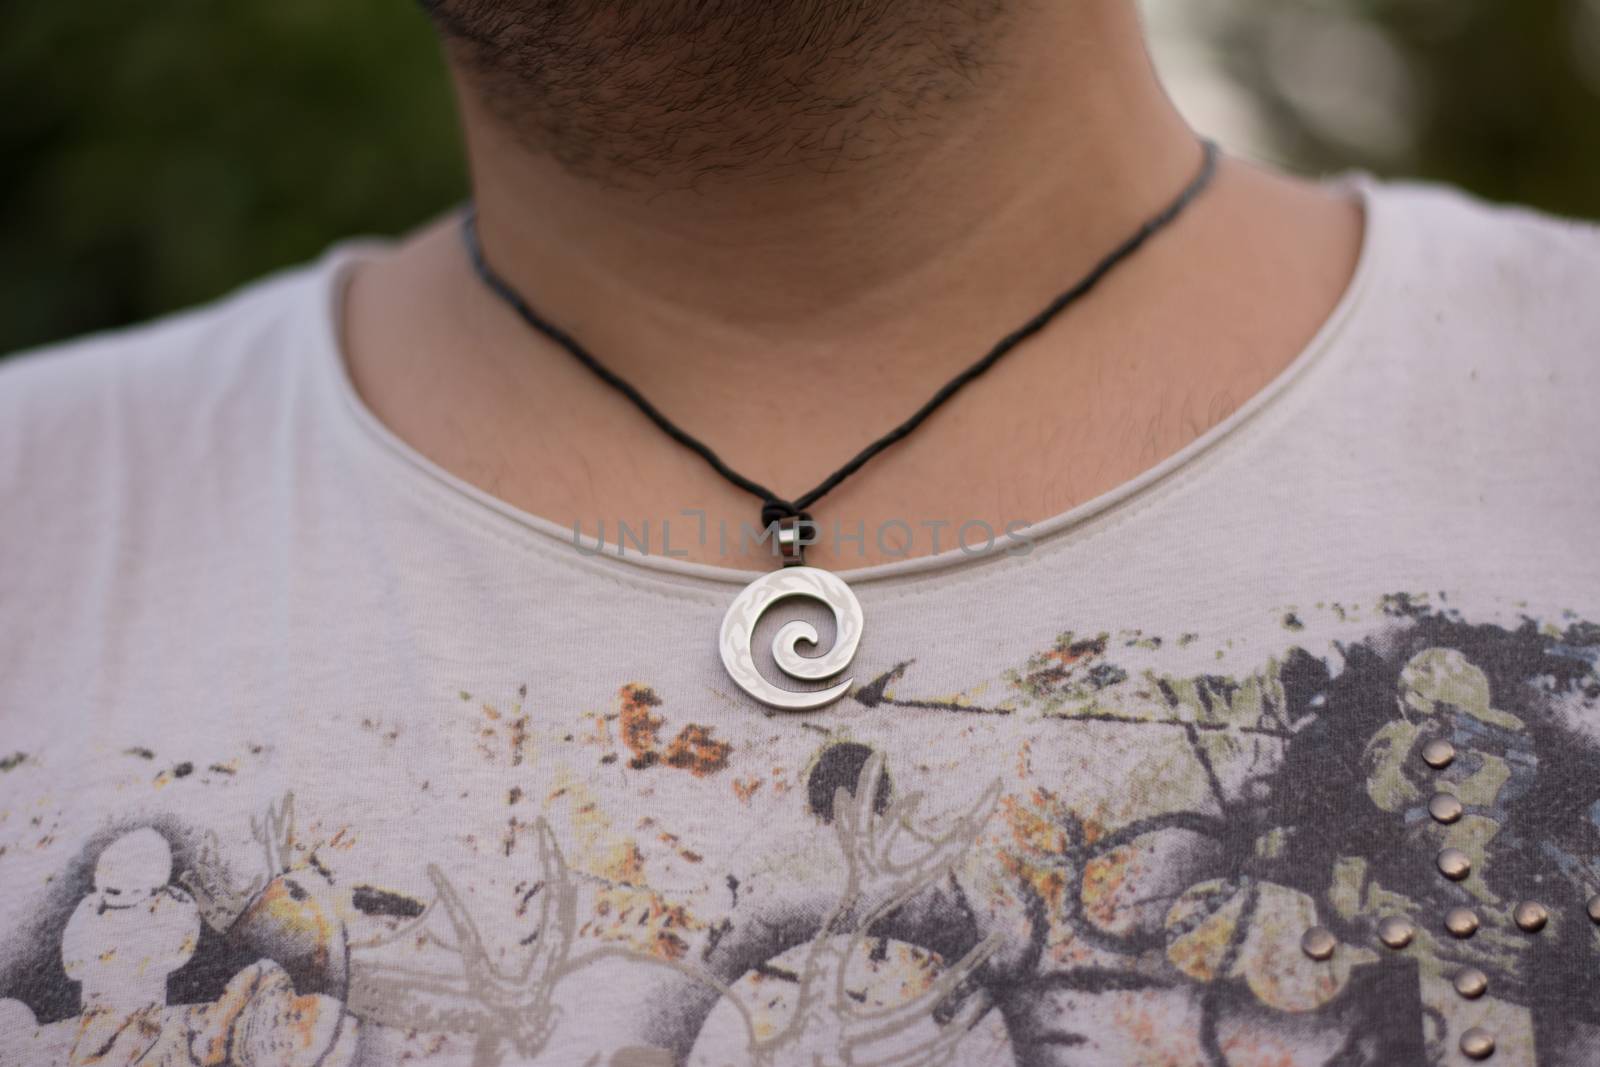 Close up view of a necklace on a man's neck.